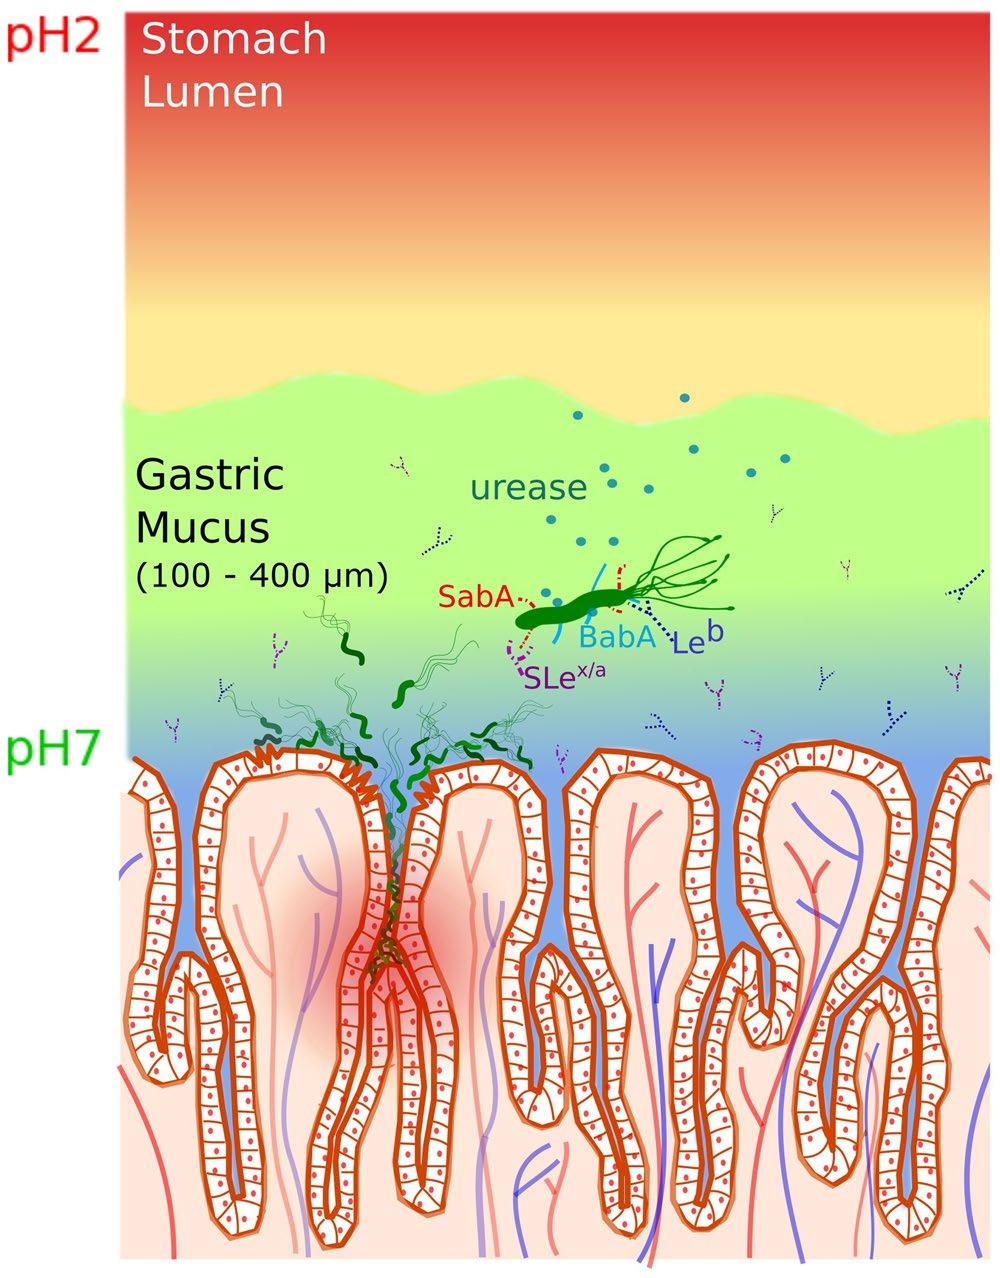 Figure 1. A schematic illustration of the gastric mucosa depicting the interaction of H. pylori with mucin.